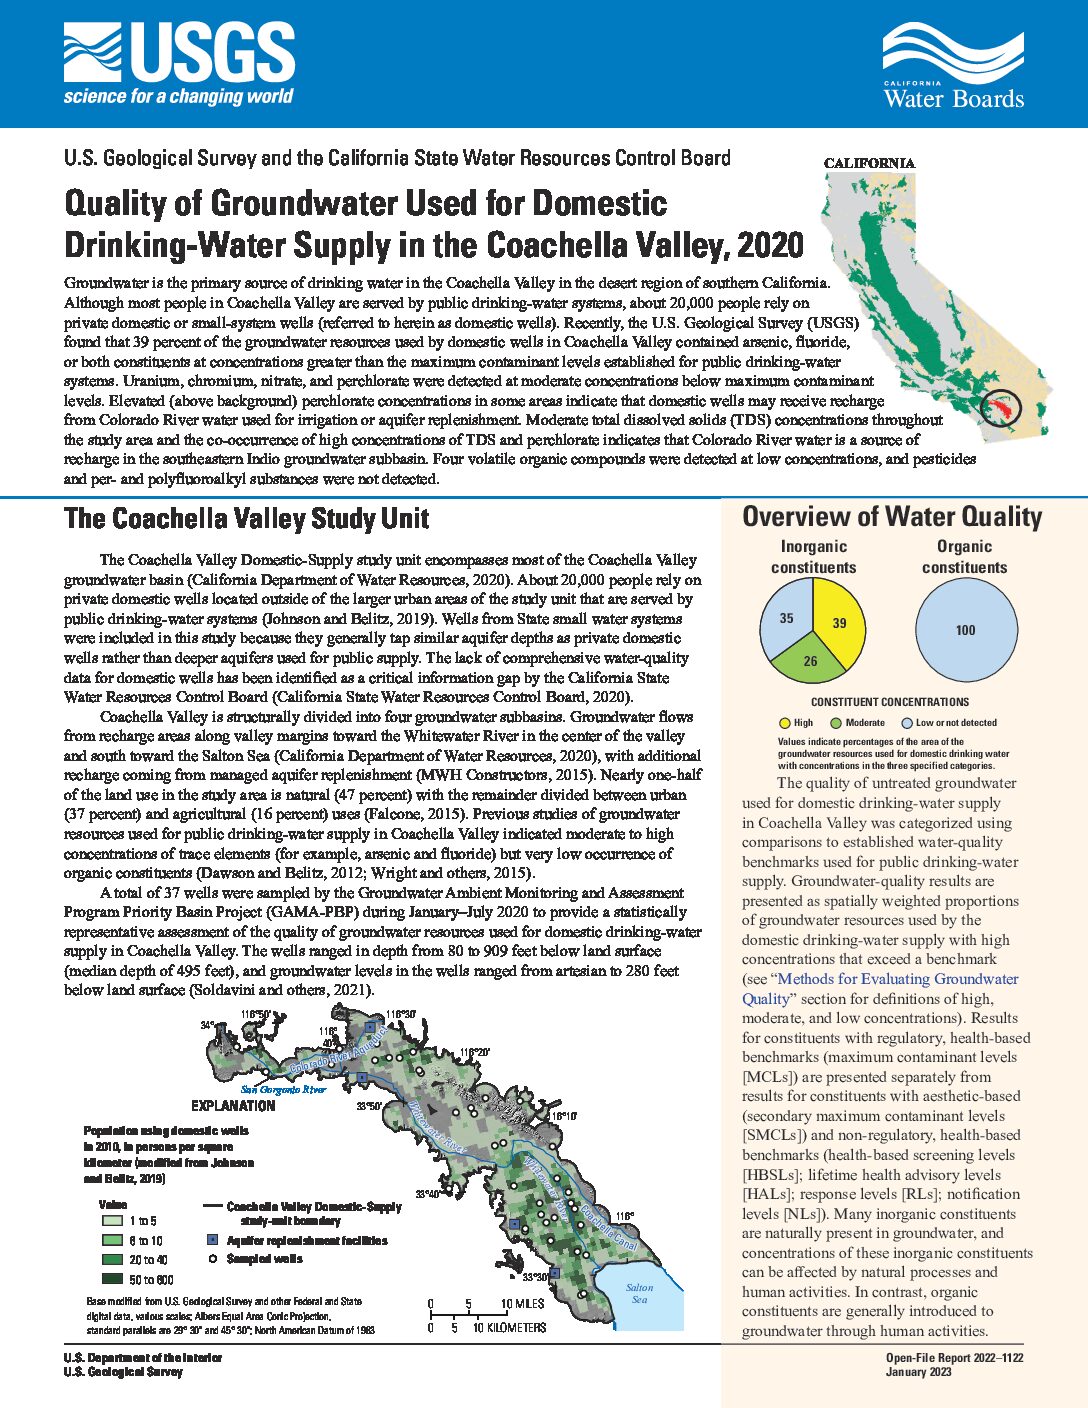 Quality of Groundwater Used for Domestic Drinking-Water Supply in the Coachella Valley, 2020